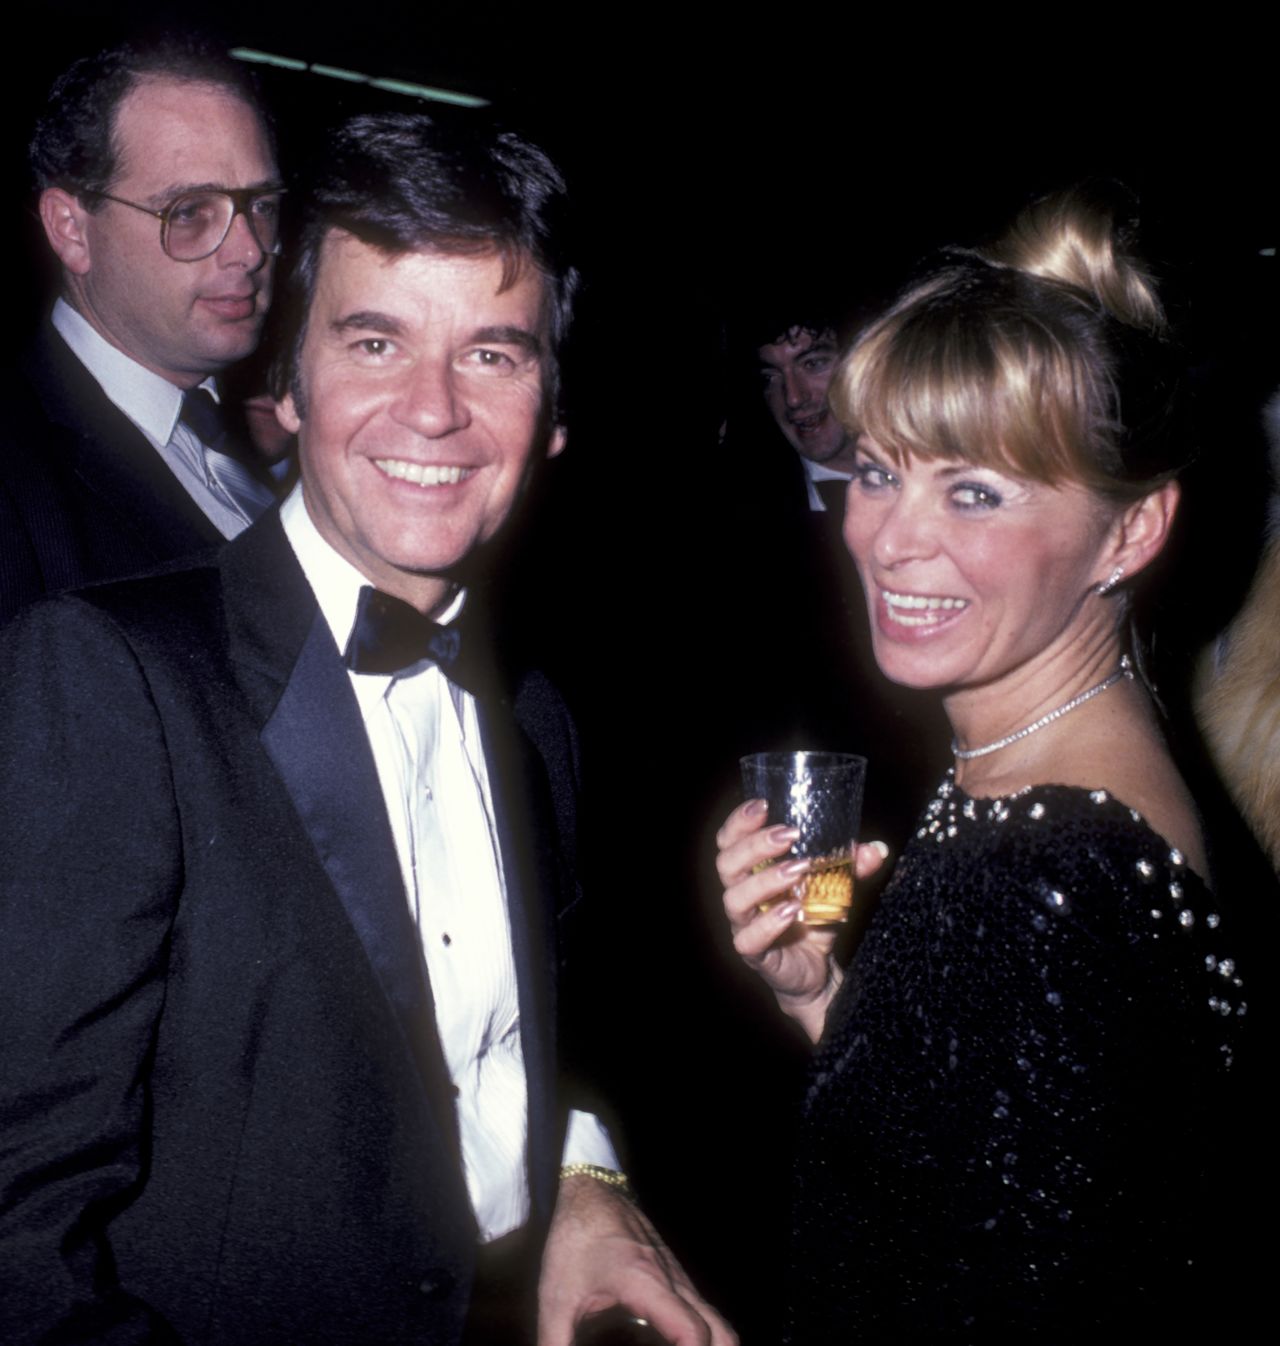 Clark and wife Karen attend  the 16th Annual Academy of Country Music Awards on April 30, 1981, at the Shrine Auditorium in Los Angeles.